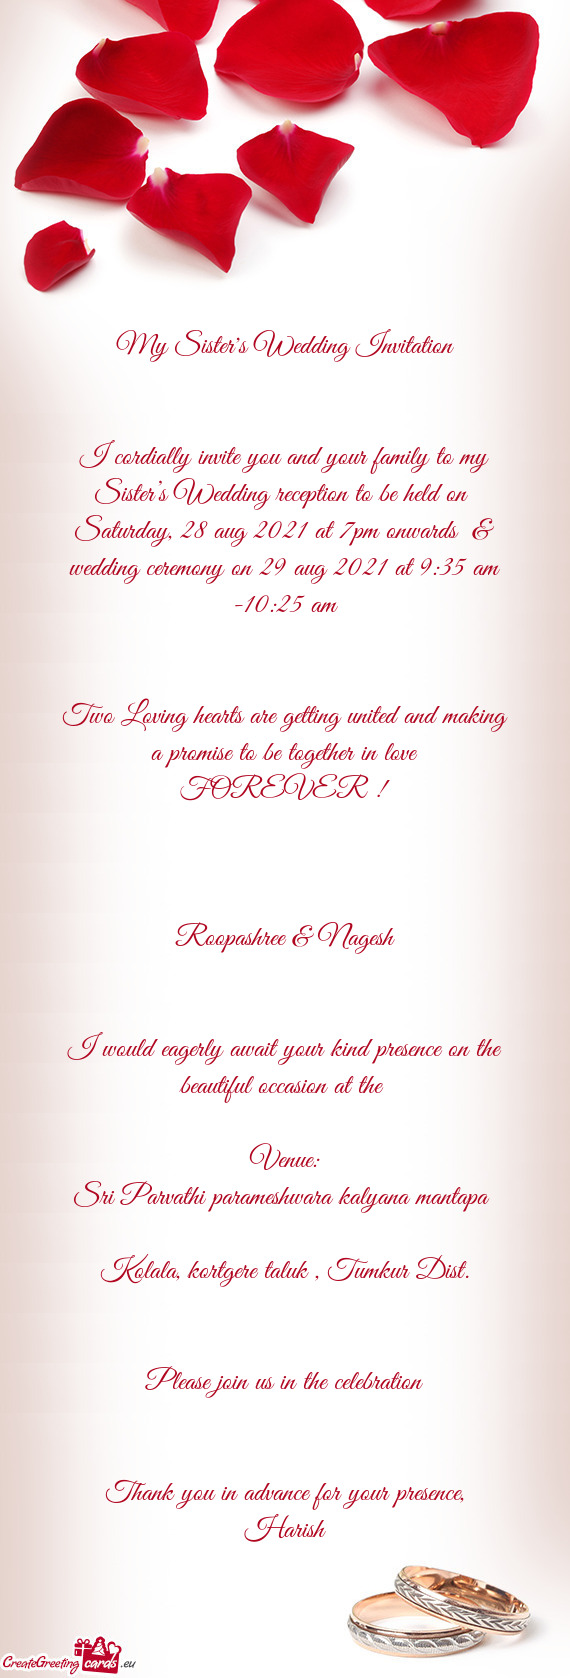 Saturday, 28 aug 2021 at 7pm onwards & wedding ceremony on 29 aug 2021 at 9:35 am -10:25 am